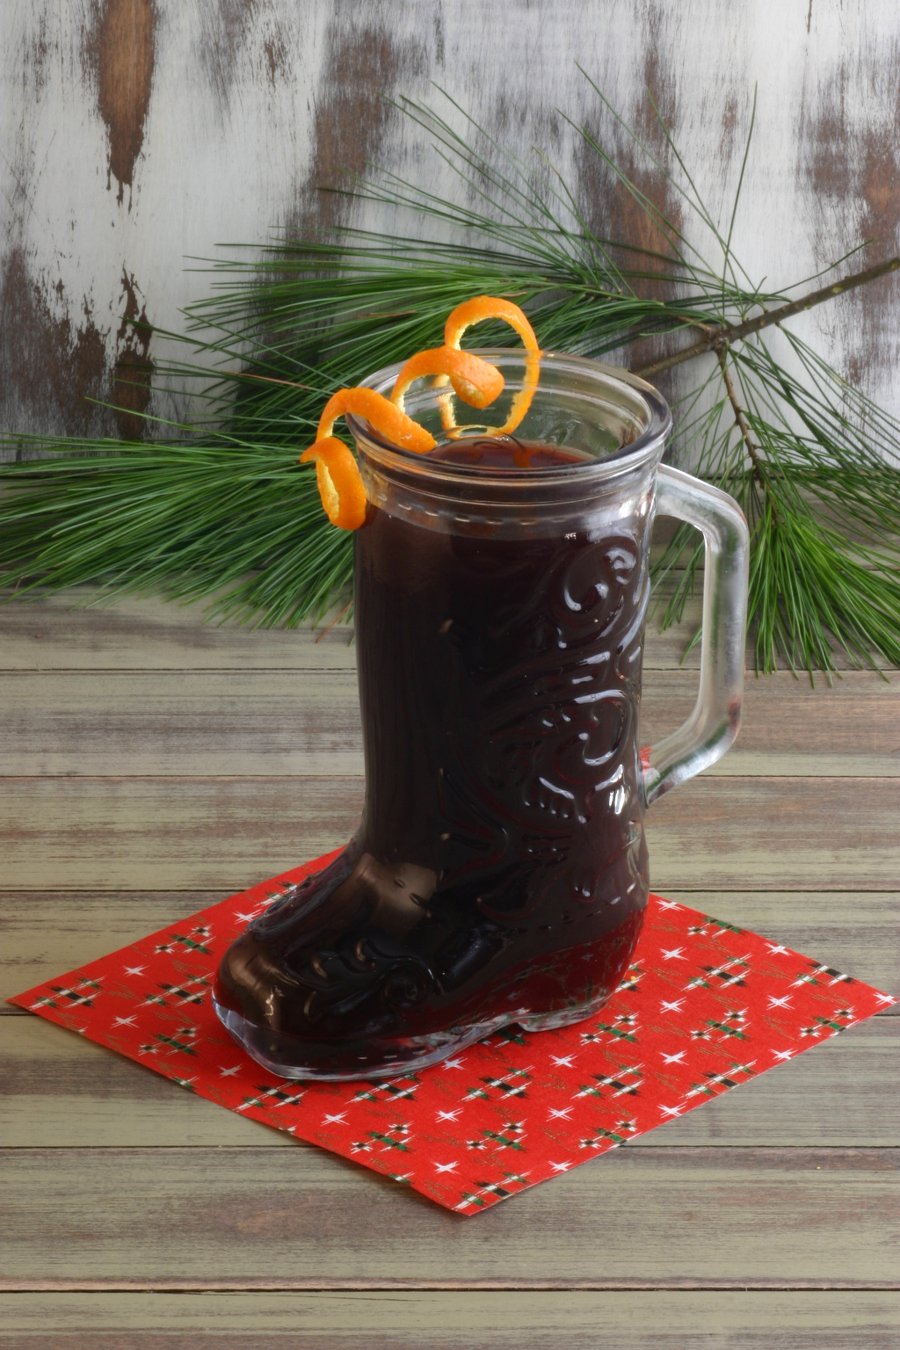 Featuring grape and pomegranate juice, spices, and citrus, this recipe for Non-Alcoholic Glühwein tastes very reminiscent of the original.